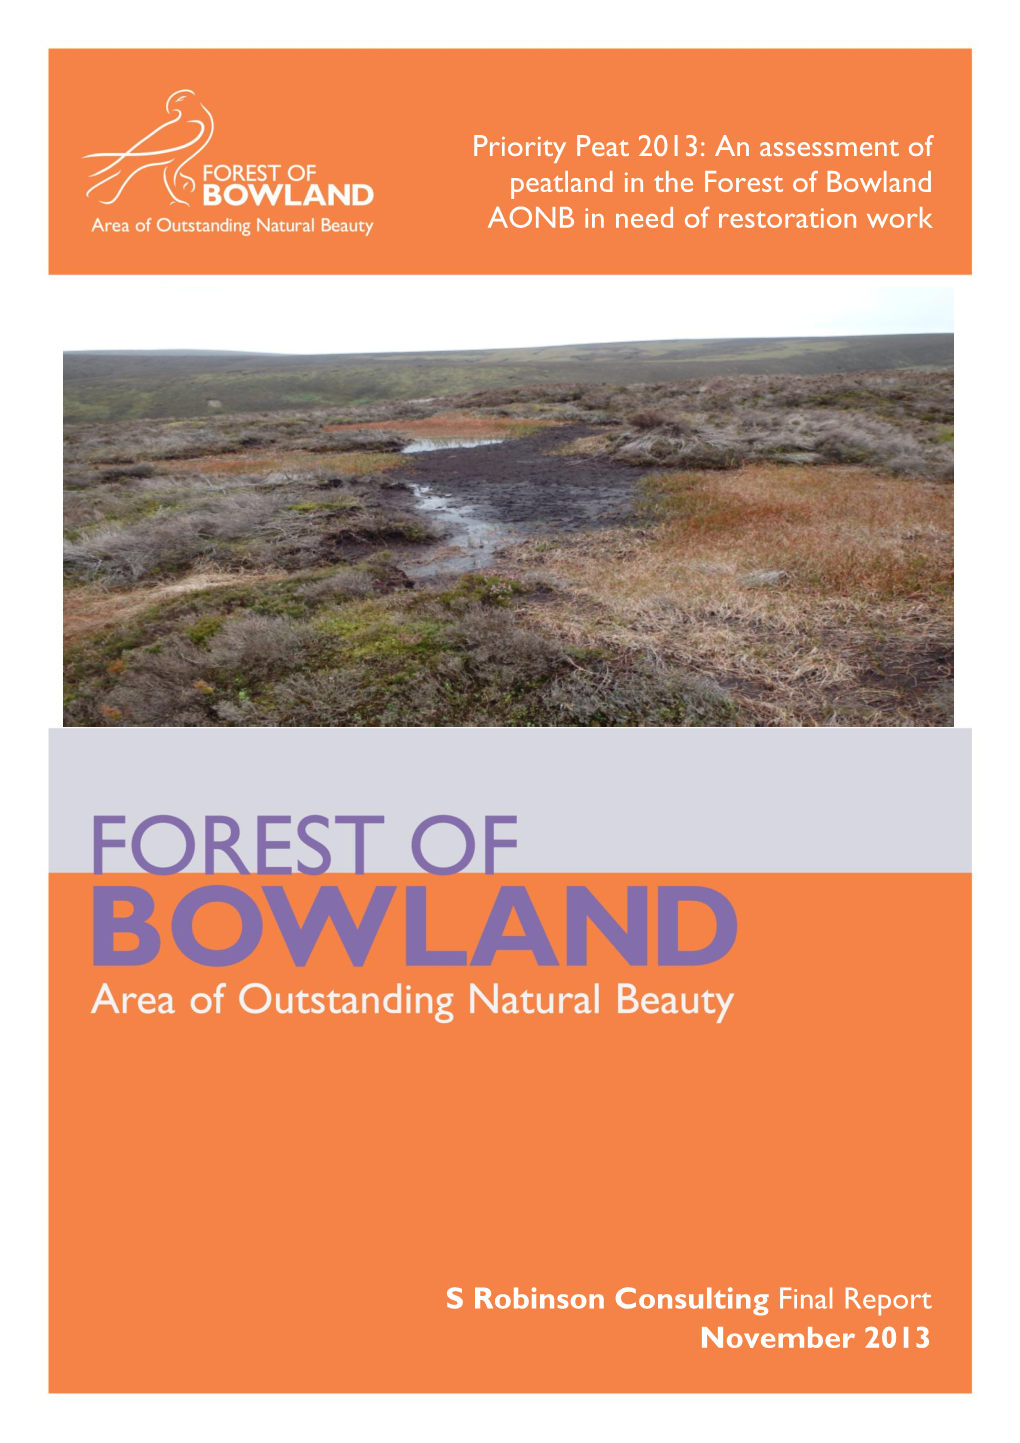 Priority Peat 2013: an Assessment of Peatland in the Forest of Bowland AONB in Need of Restoration Work